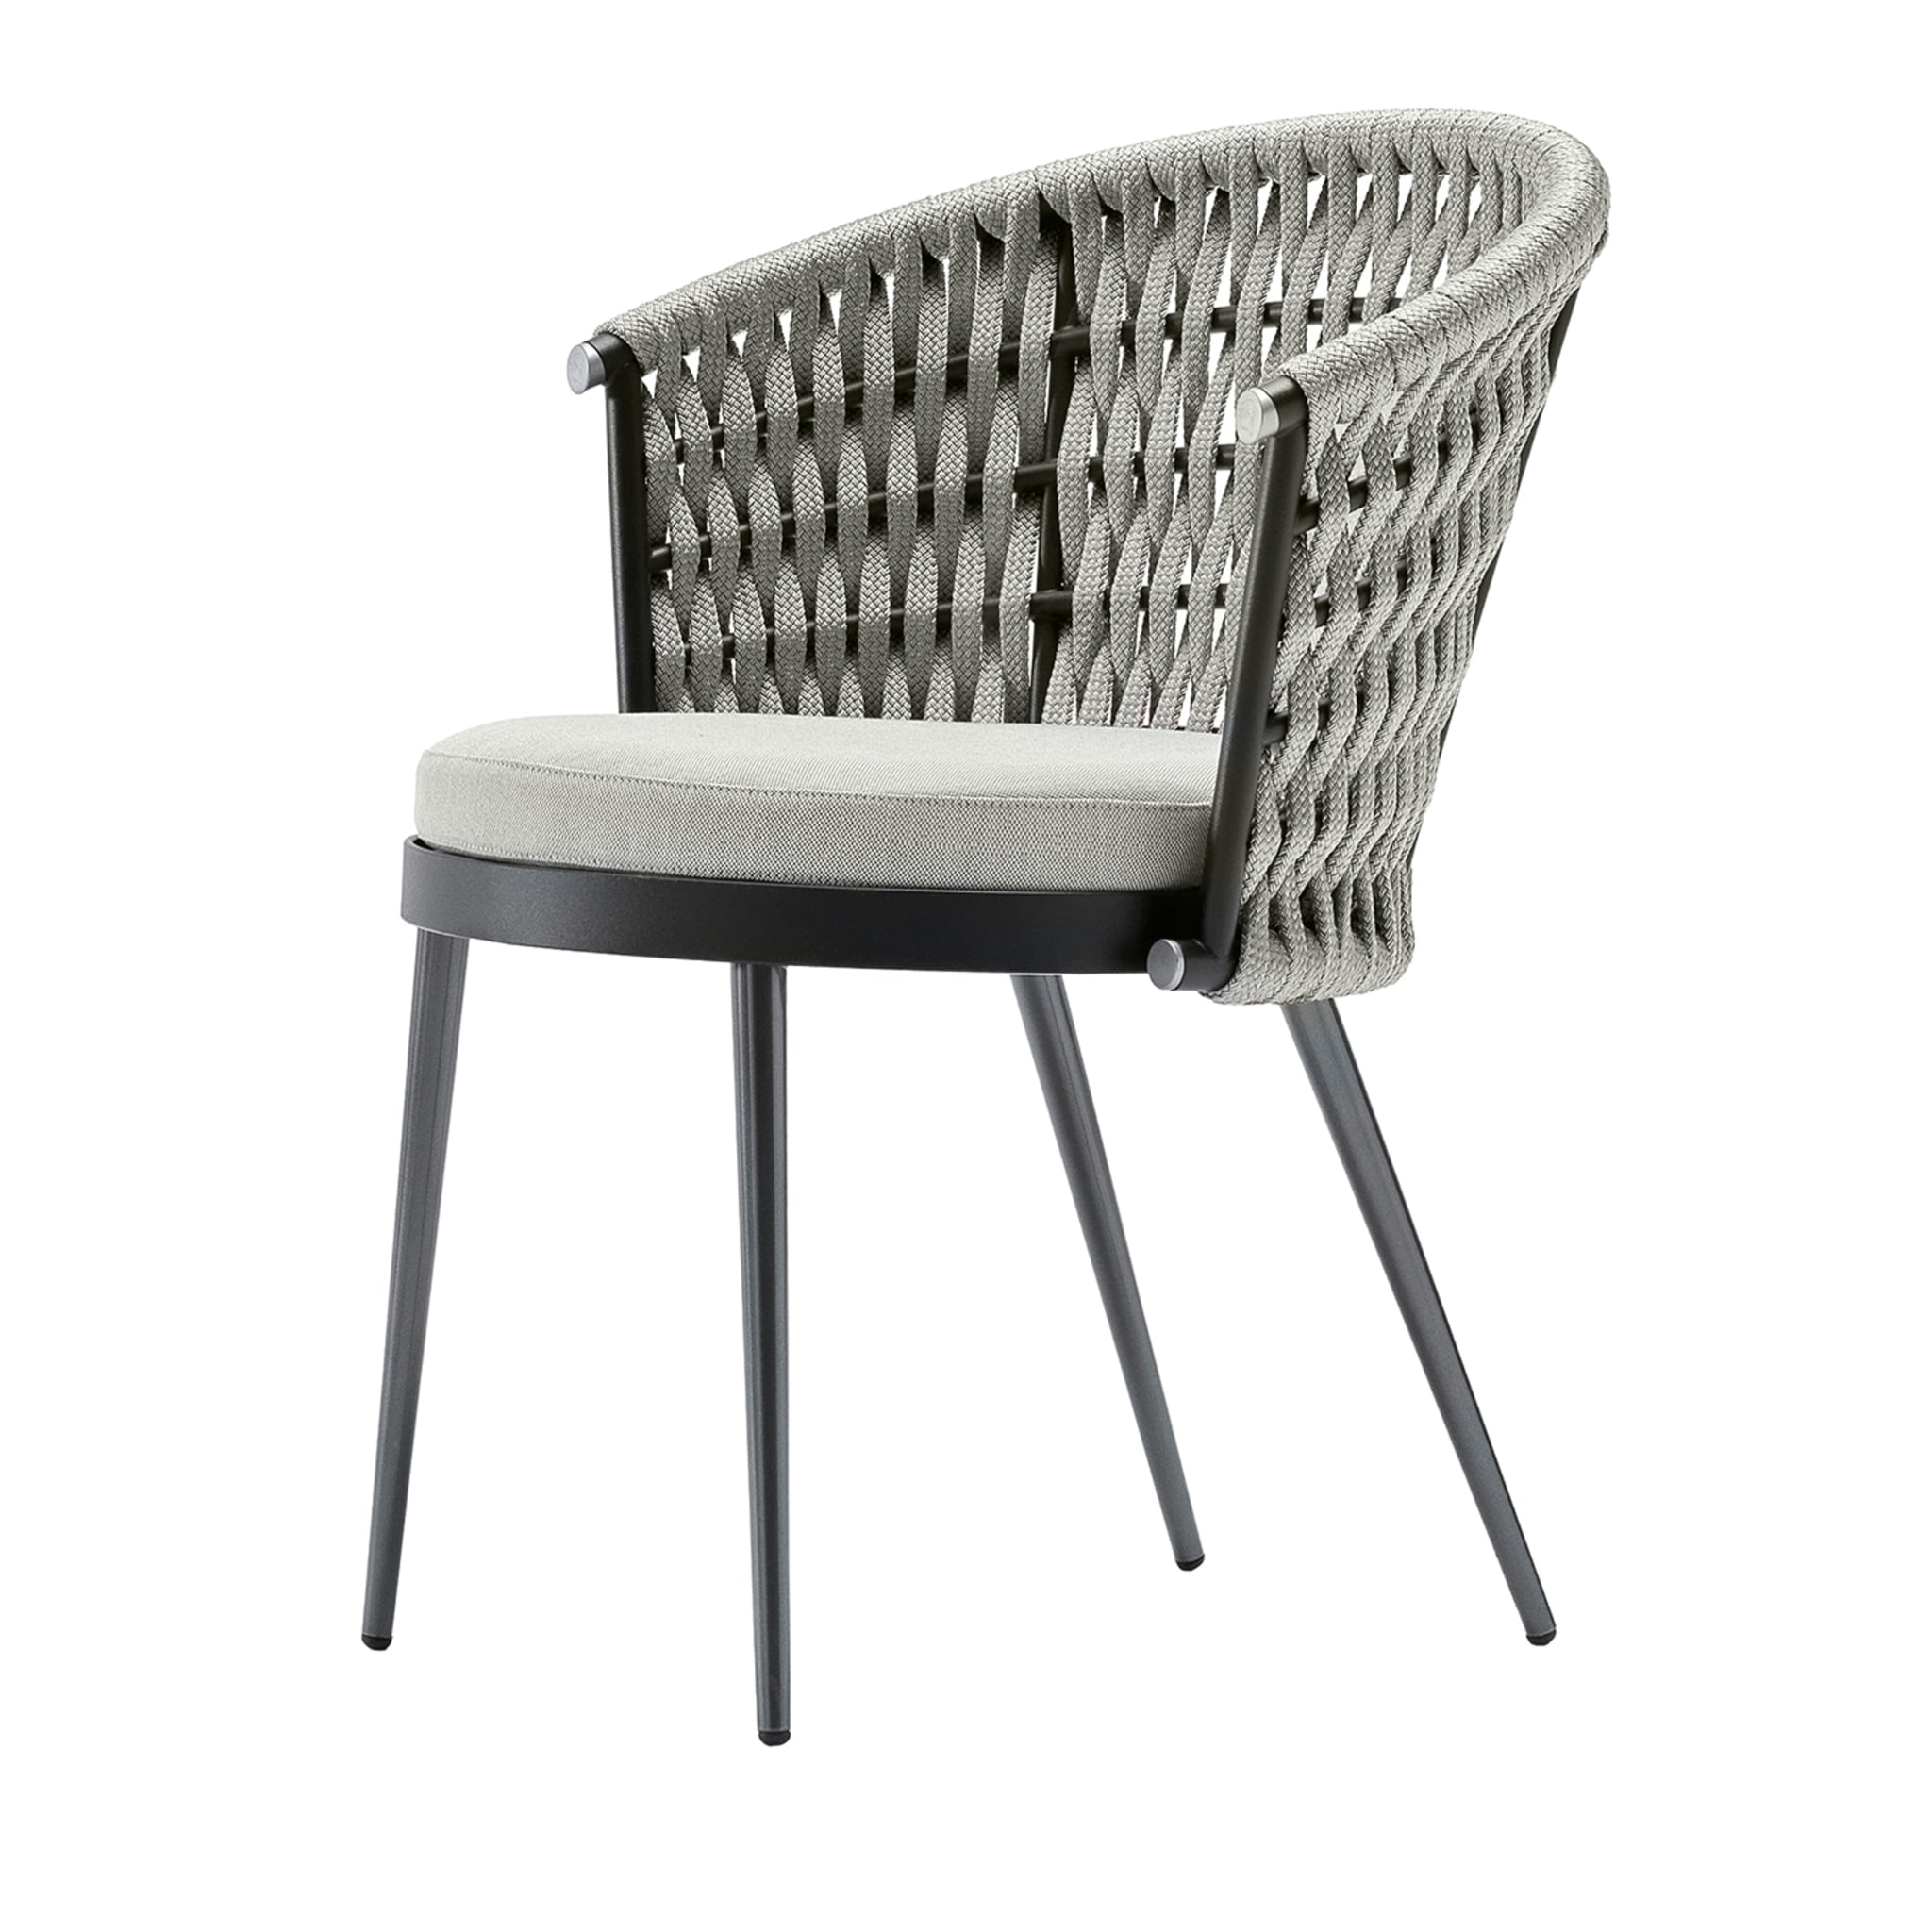 Gray Outdoor fabric Chair - Main view